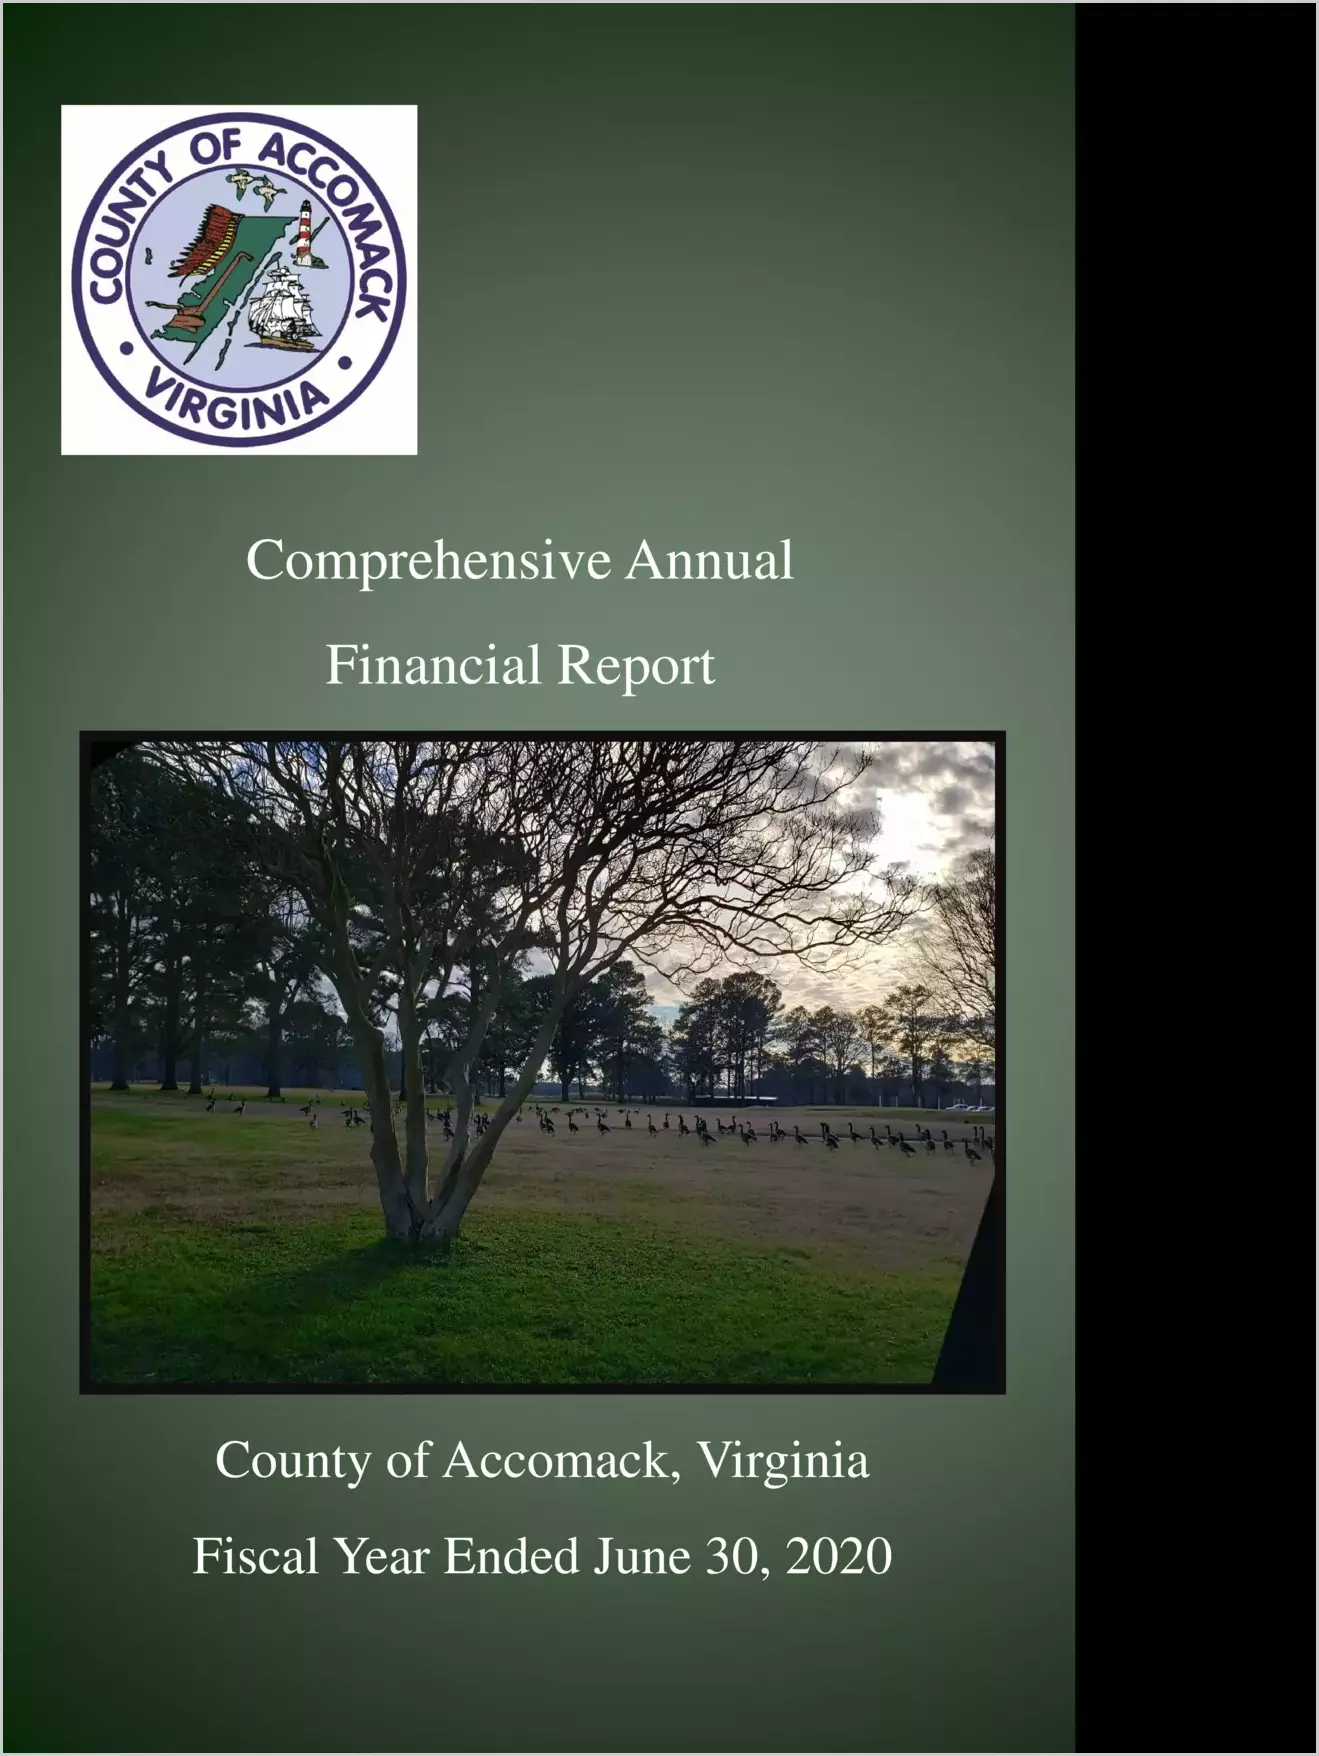 2020 Annual Financial Report for County of Accomack